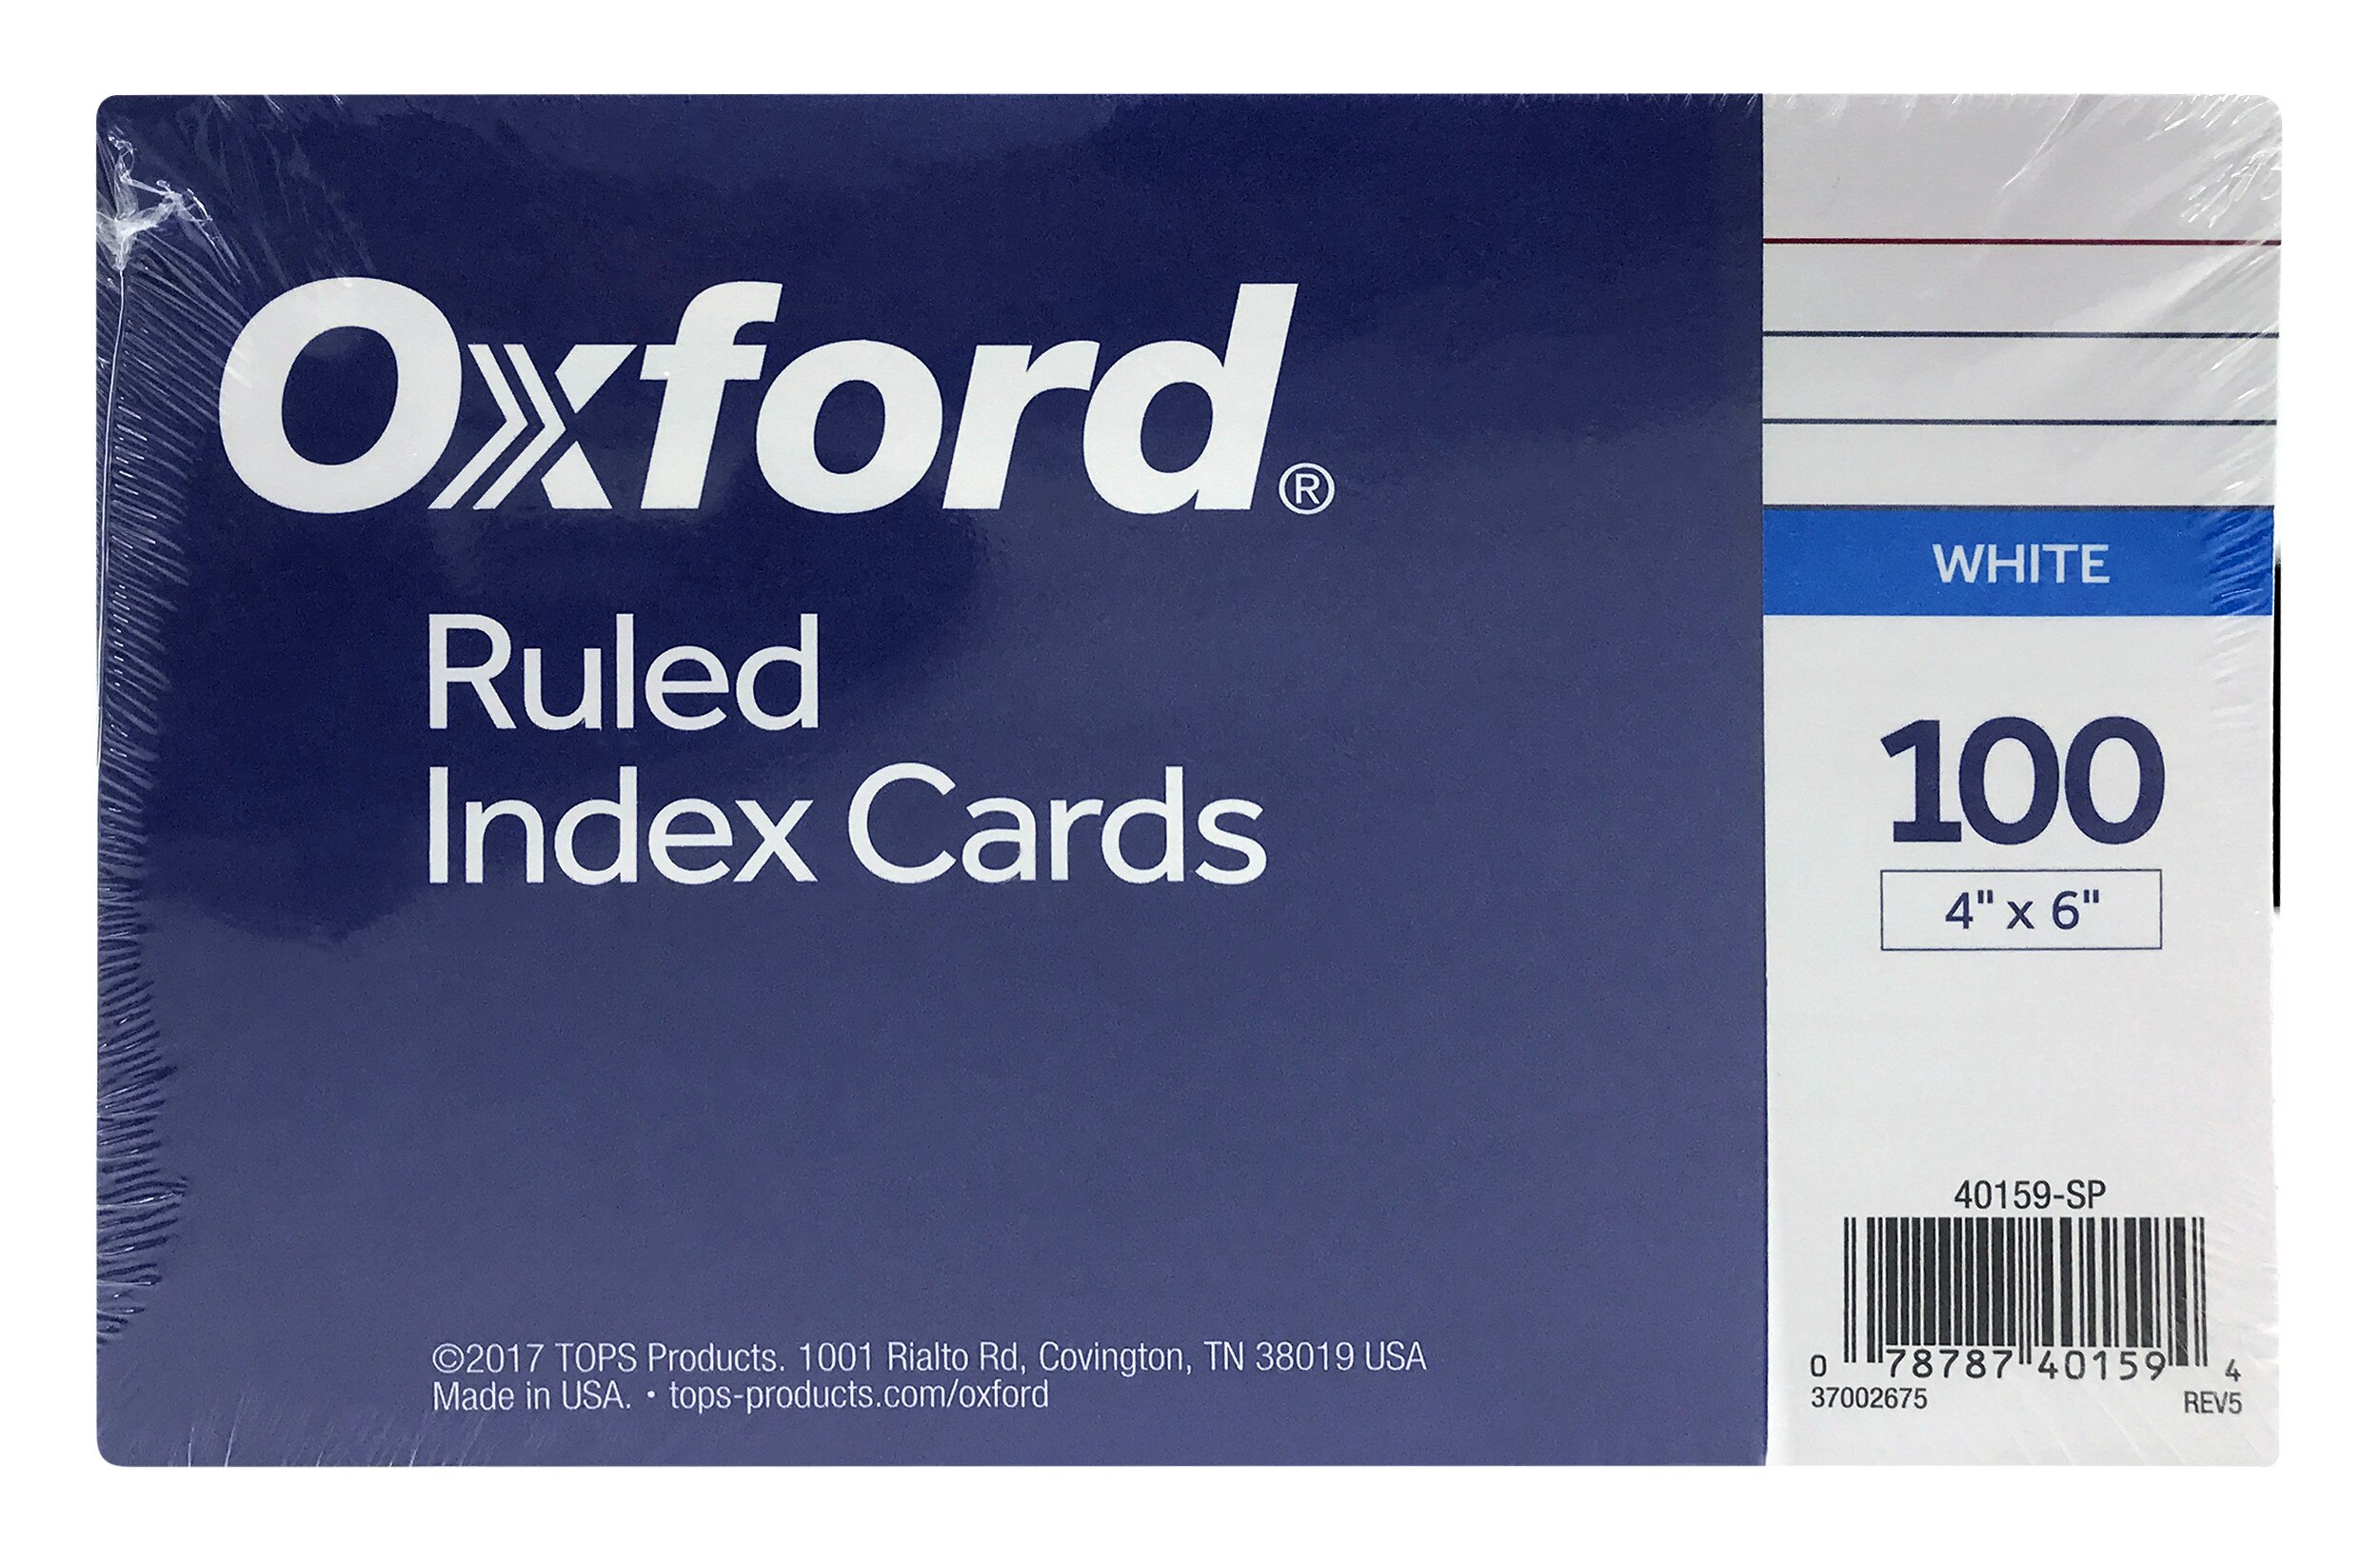 4 X 6 RULED INDEX CARDS